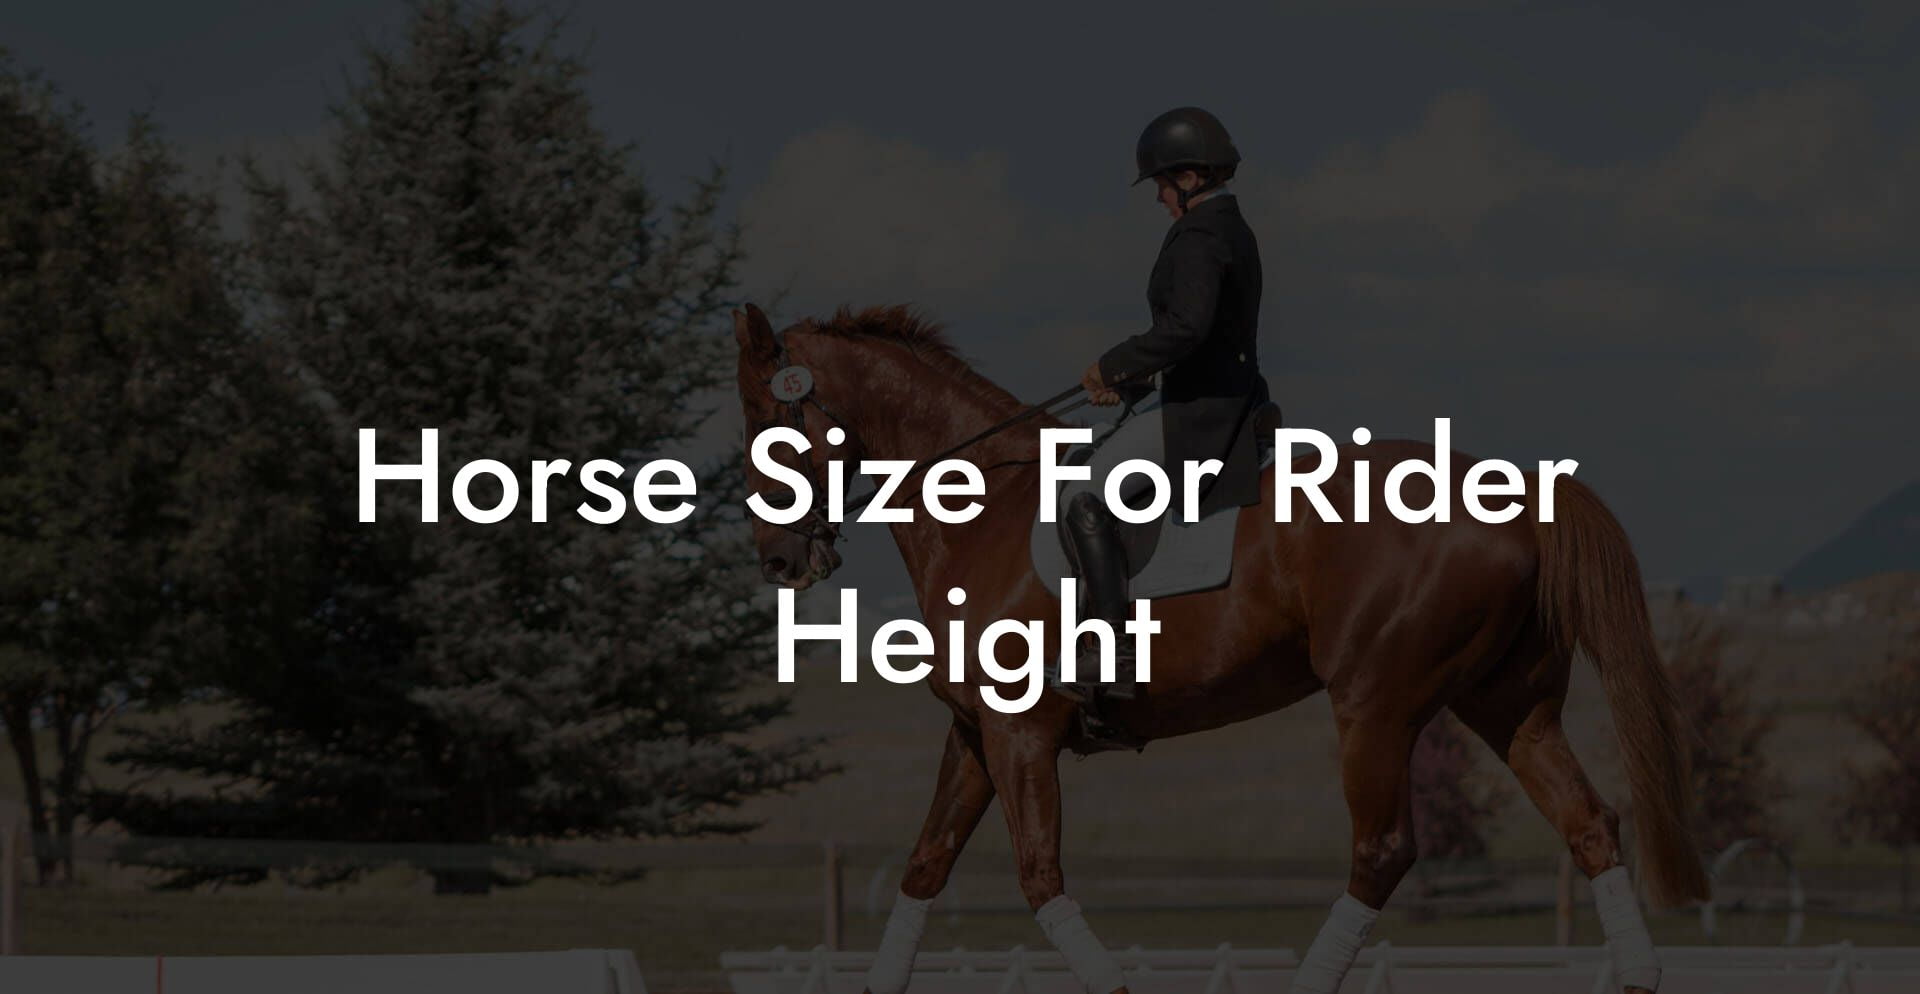 Horse Size For Rider Height